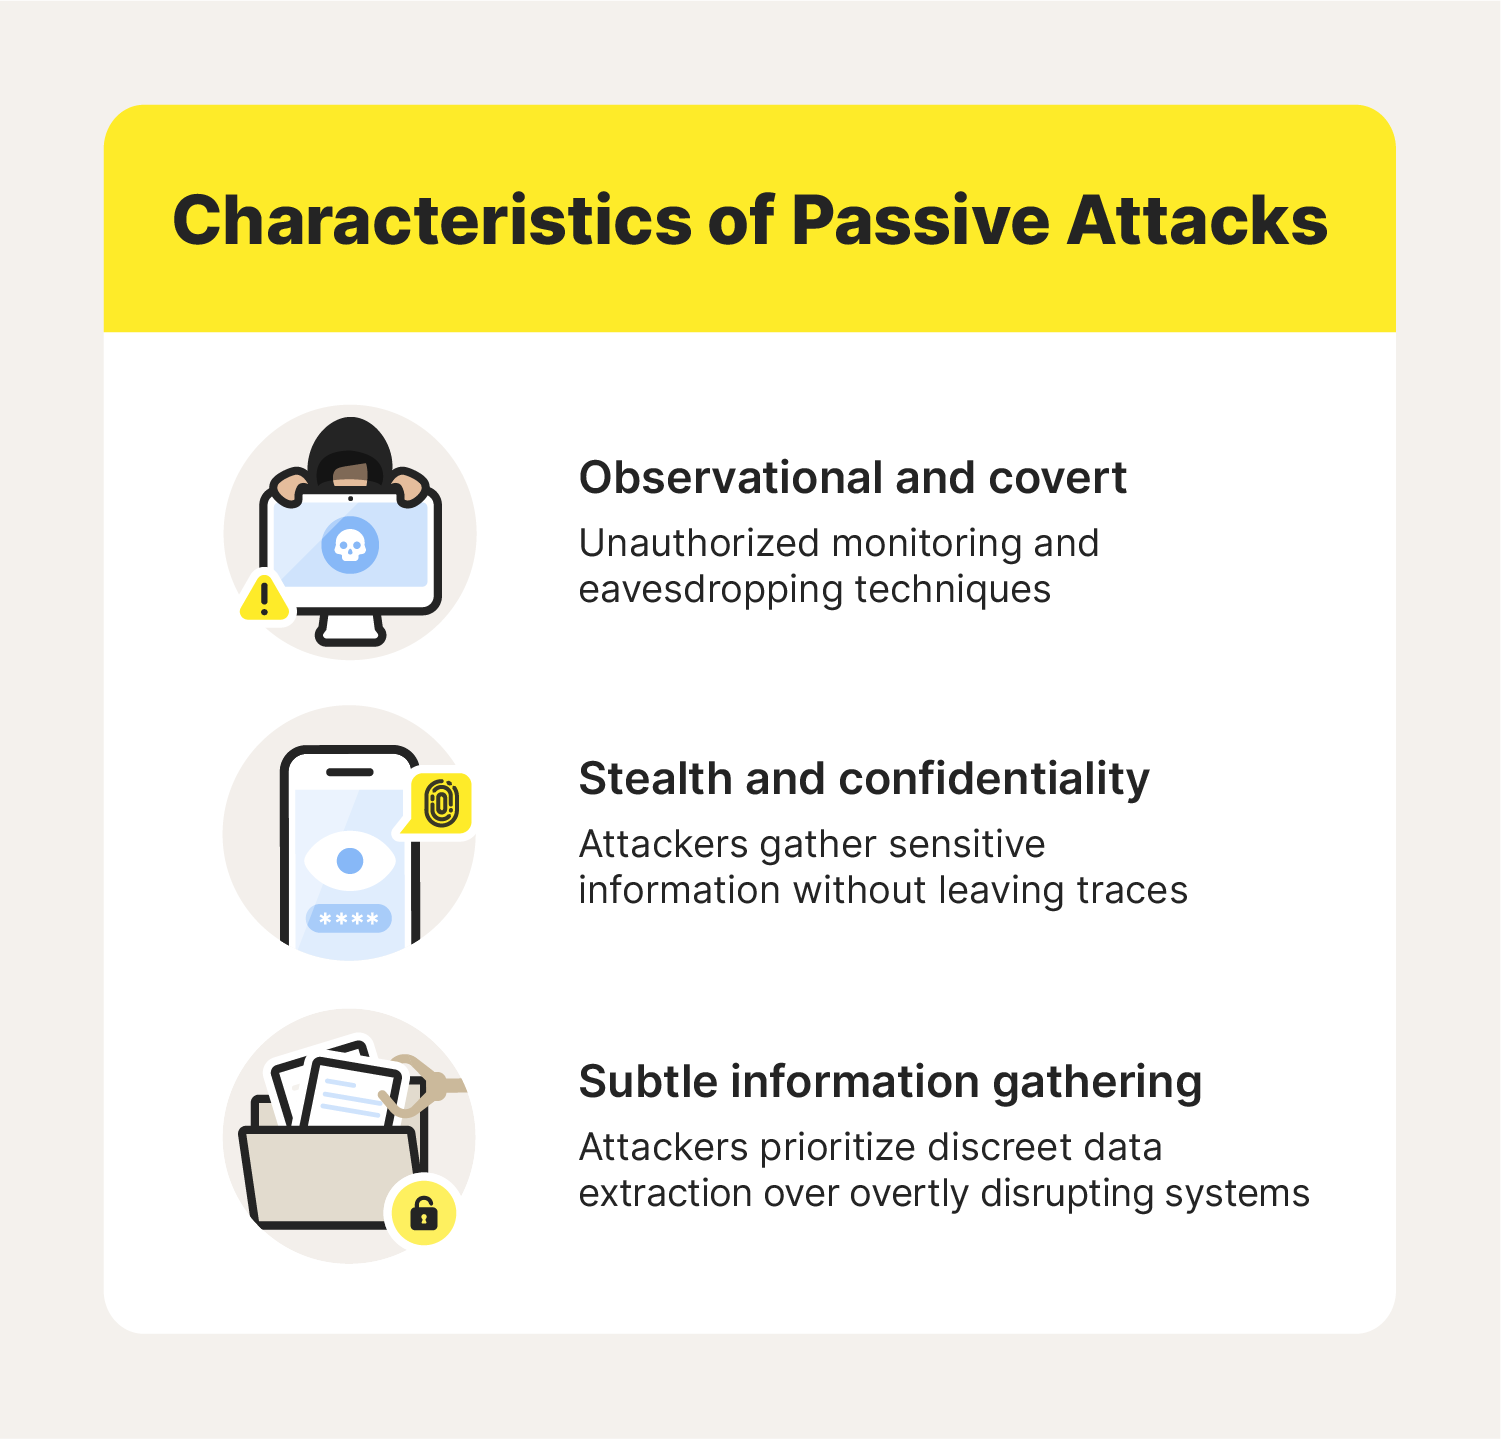 A graphic listing the characteristics of passive attacks to educate about attack vectors.